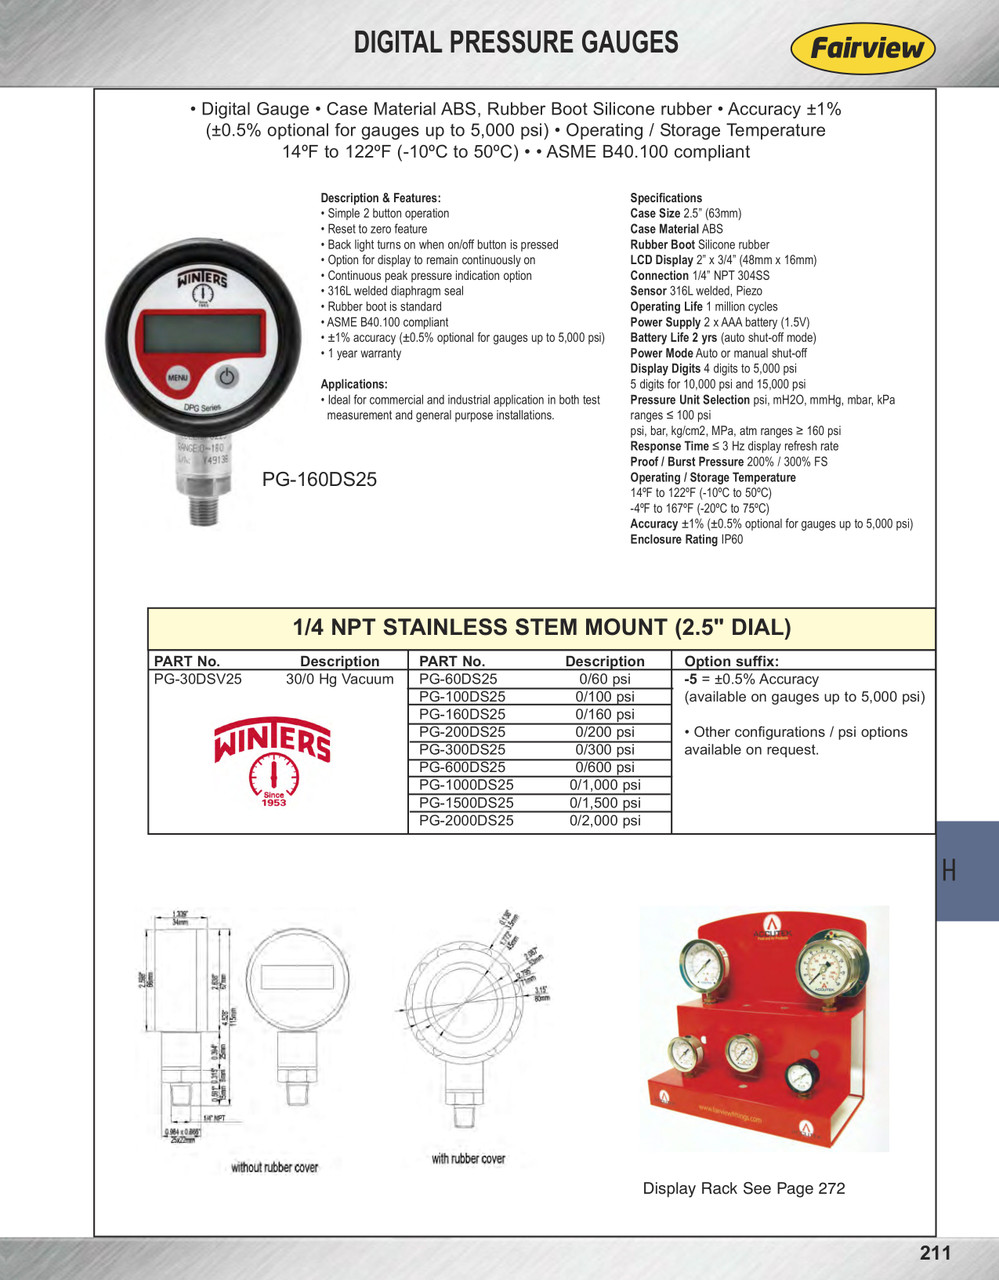 0-160 PSI  - 2-1/2" Digital LCD - Rubberized ABS Case - Stainless Stem Mount - Pressure Gauge  PG-160DS25